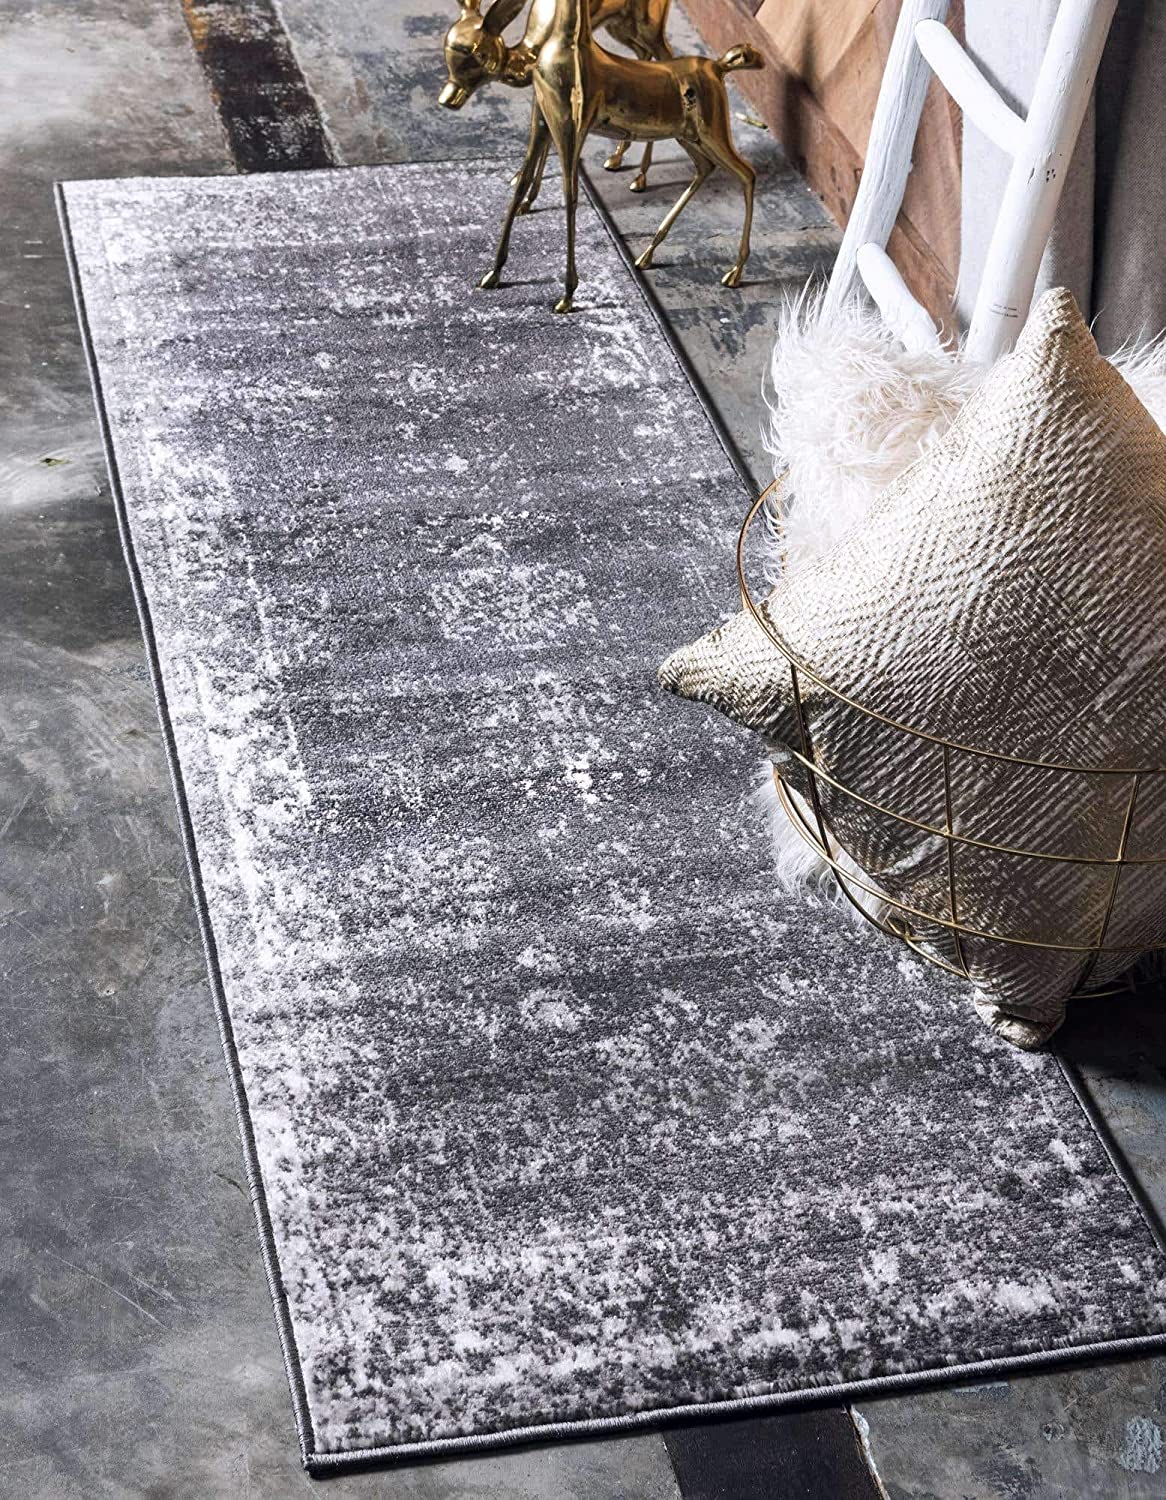 Top 10 Classique Rugs You Will Love In 2020